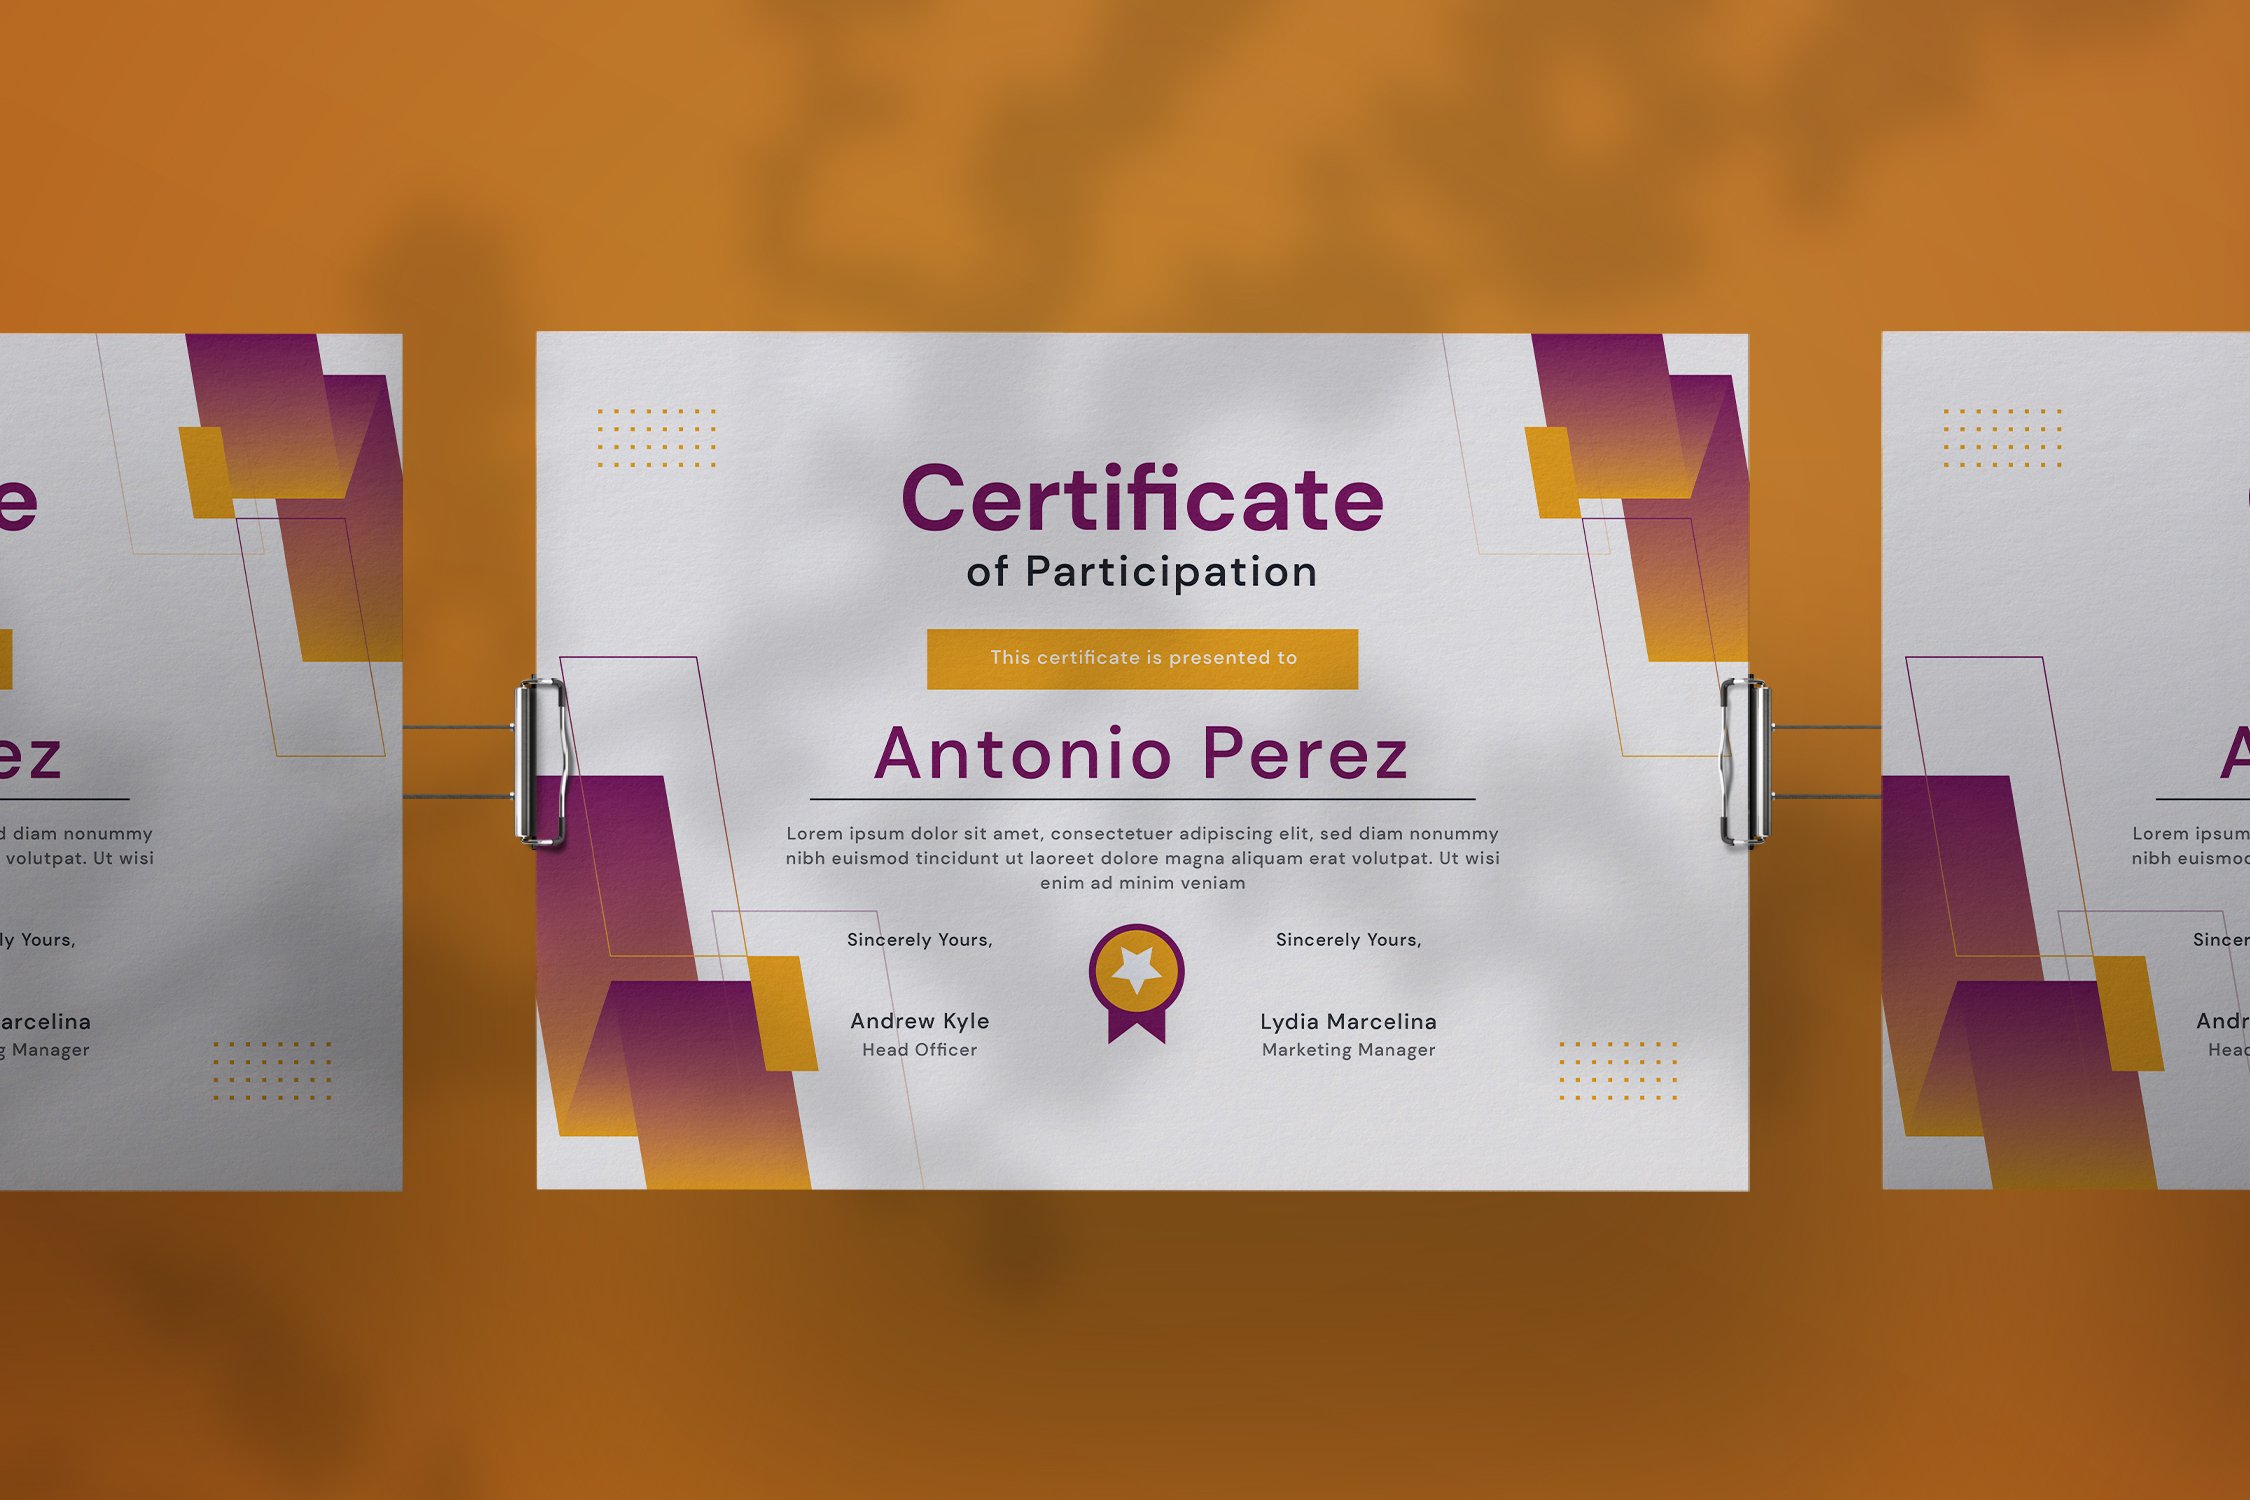 Geometricals - Certificate Template cover image.